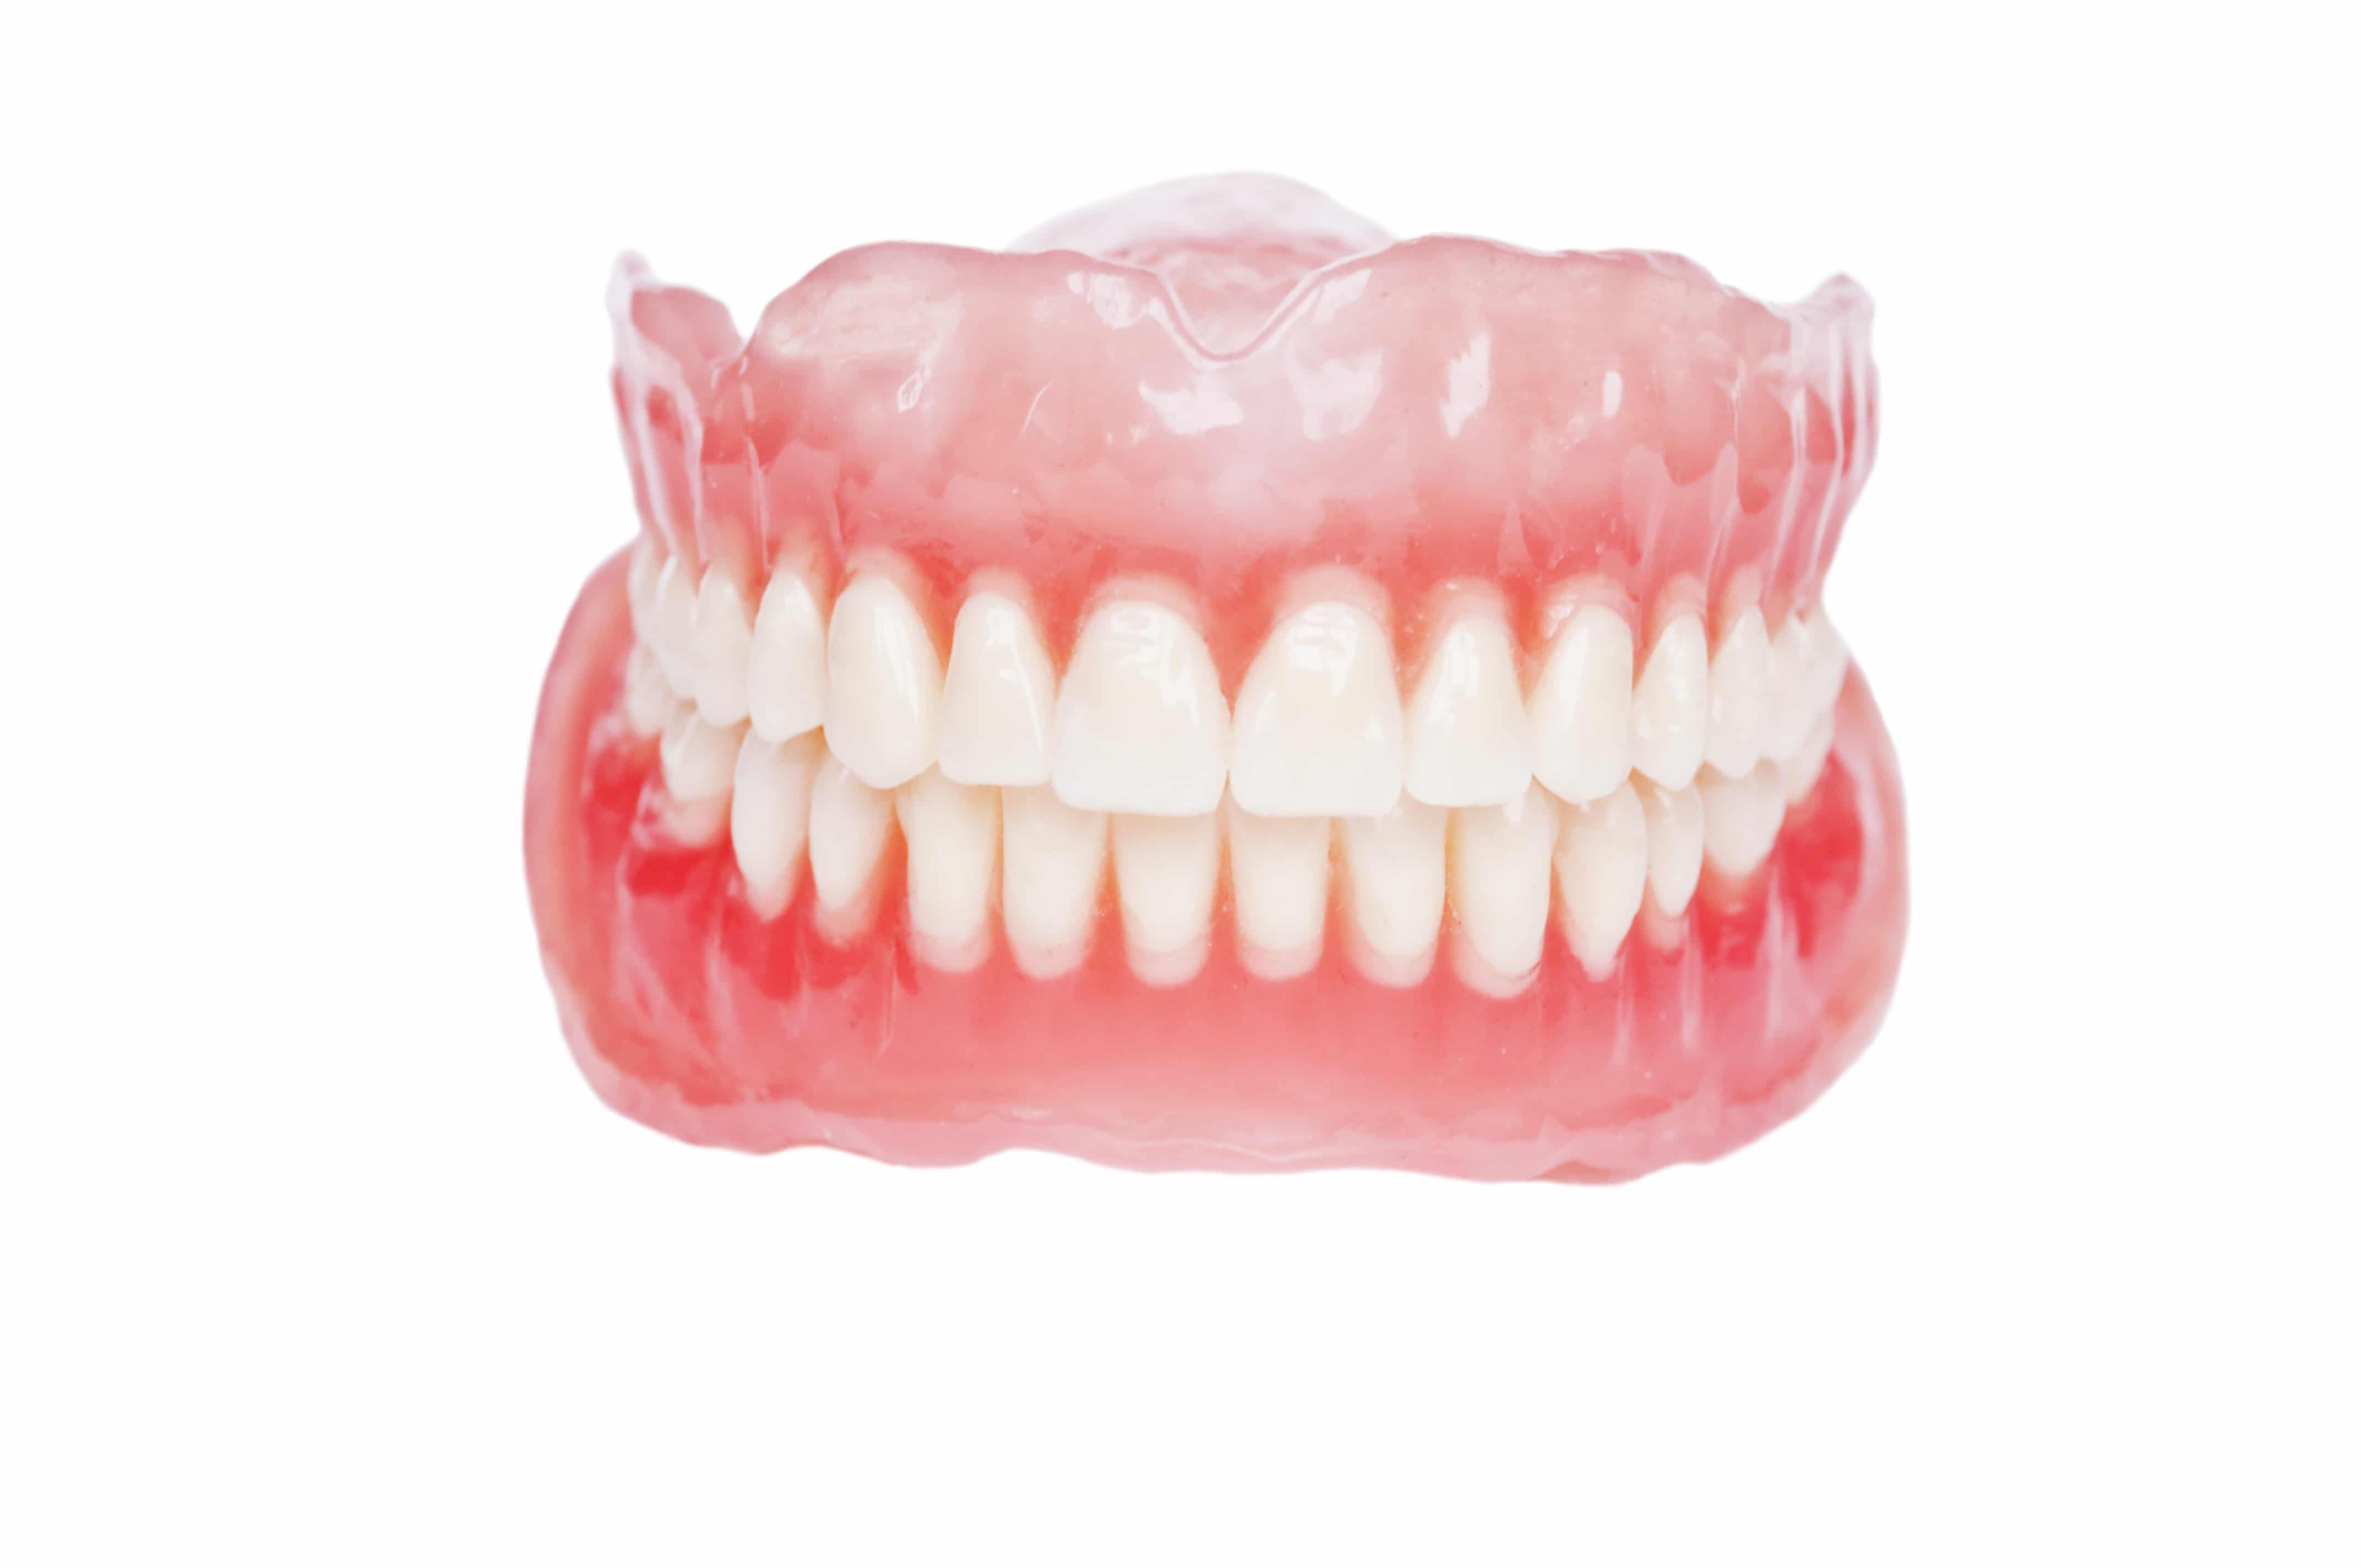 A type of dental prosthesis known as dentures